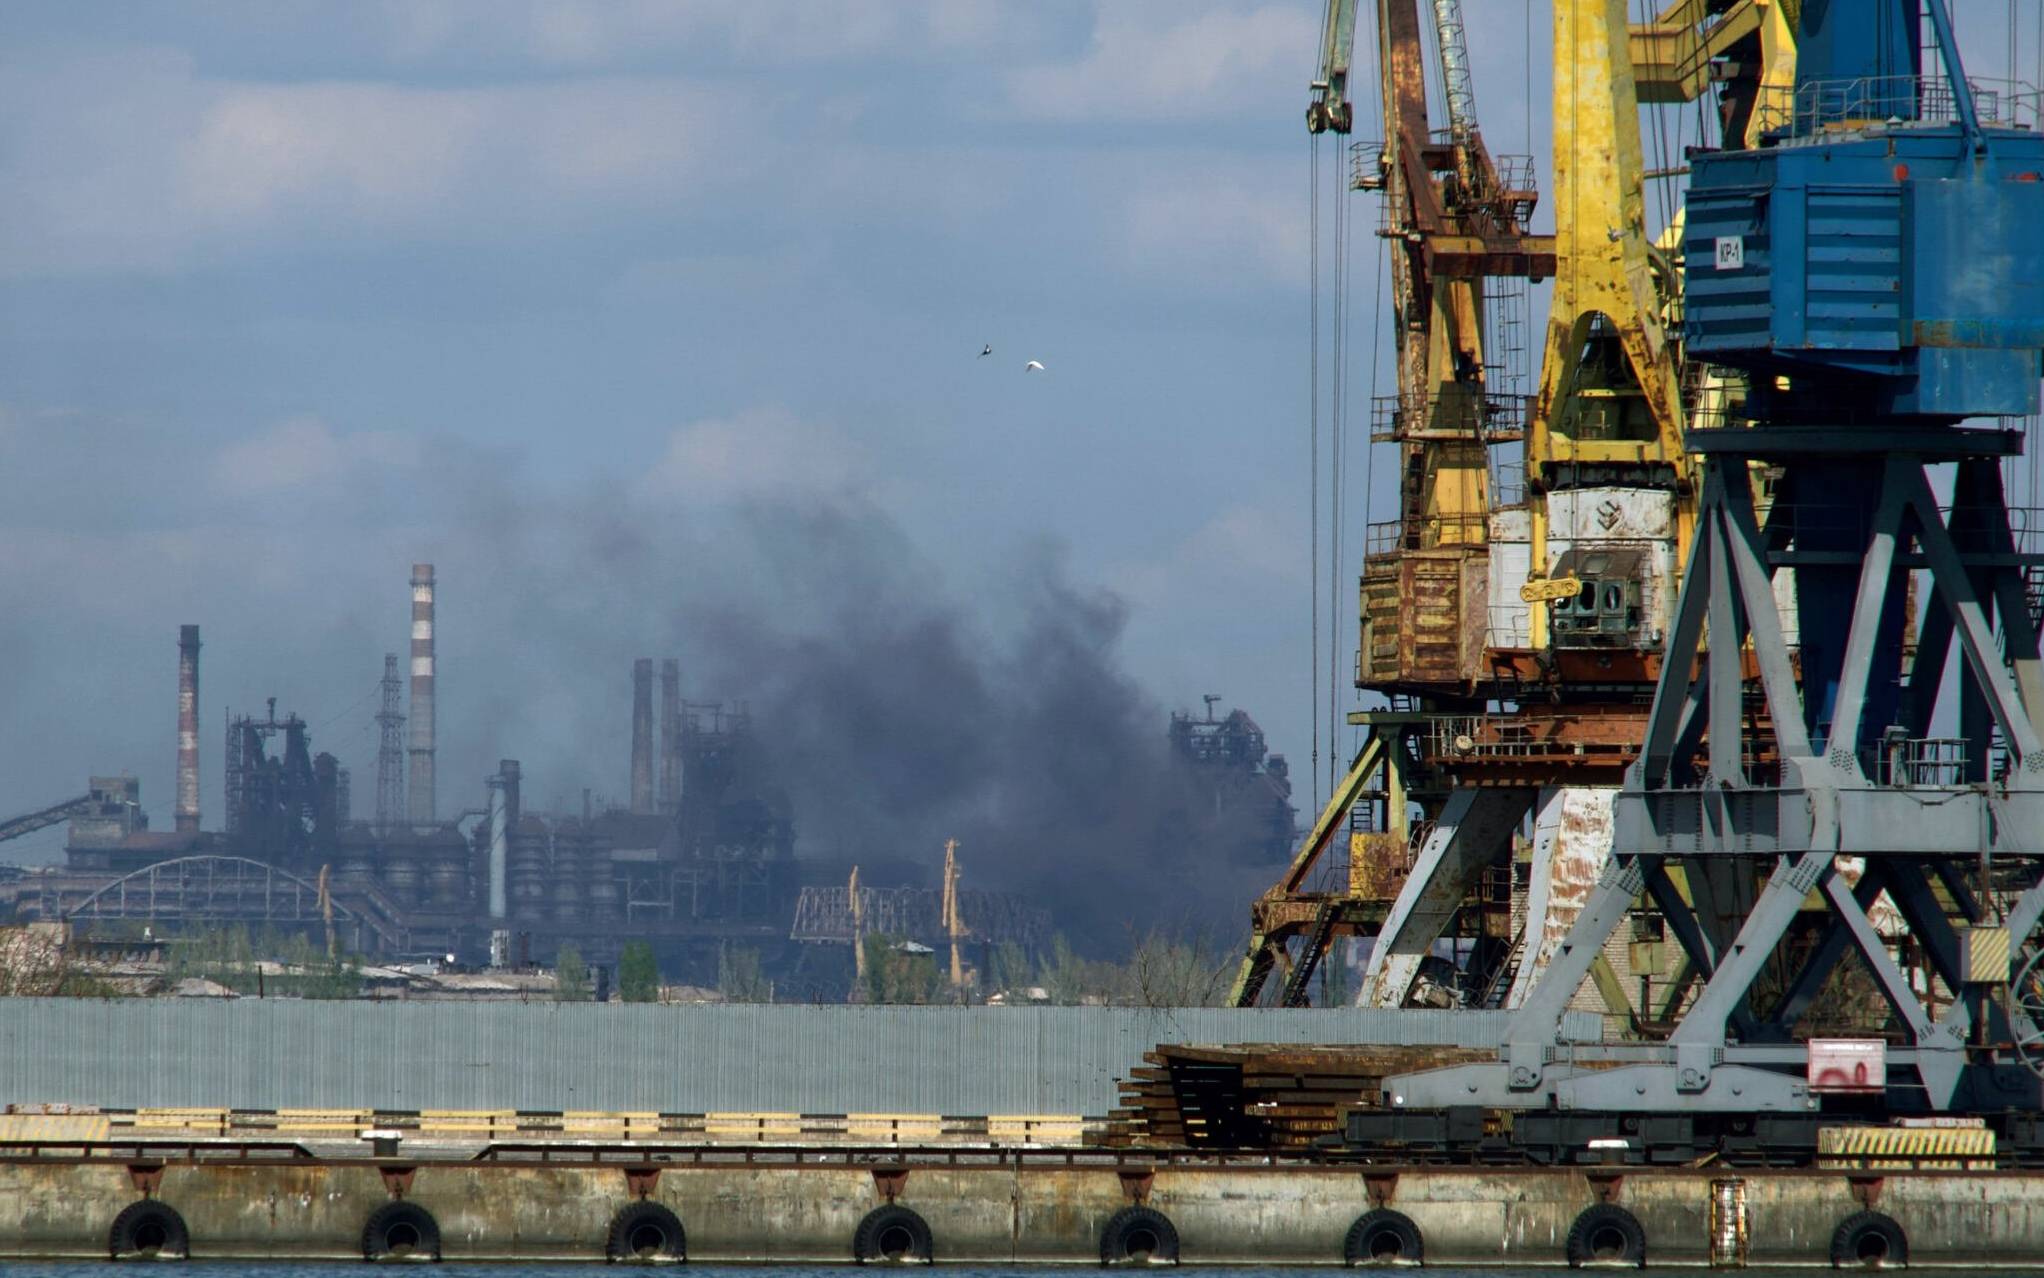 ALTERNATIVE CROP - Smoke rises above the Azovstal steel plant in the city of Mariupol on April 29, 2022, amid the ongoing Russian military action in Ukraine.
The mayor of the destroyed Ukrainian city of Mariupol said on May 4, 2022 that contact was lost with Ukrainian forces holed up in the Azovstal steel plant amid fierce battles with Russian troops. - *EDITOR'S NOTE: This picture was taken during a media trip organised by the Russian army.* (Photo by Andrey BORODULIN / AFP)